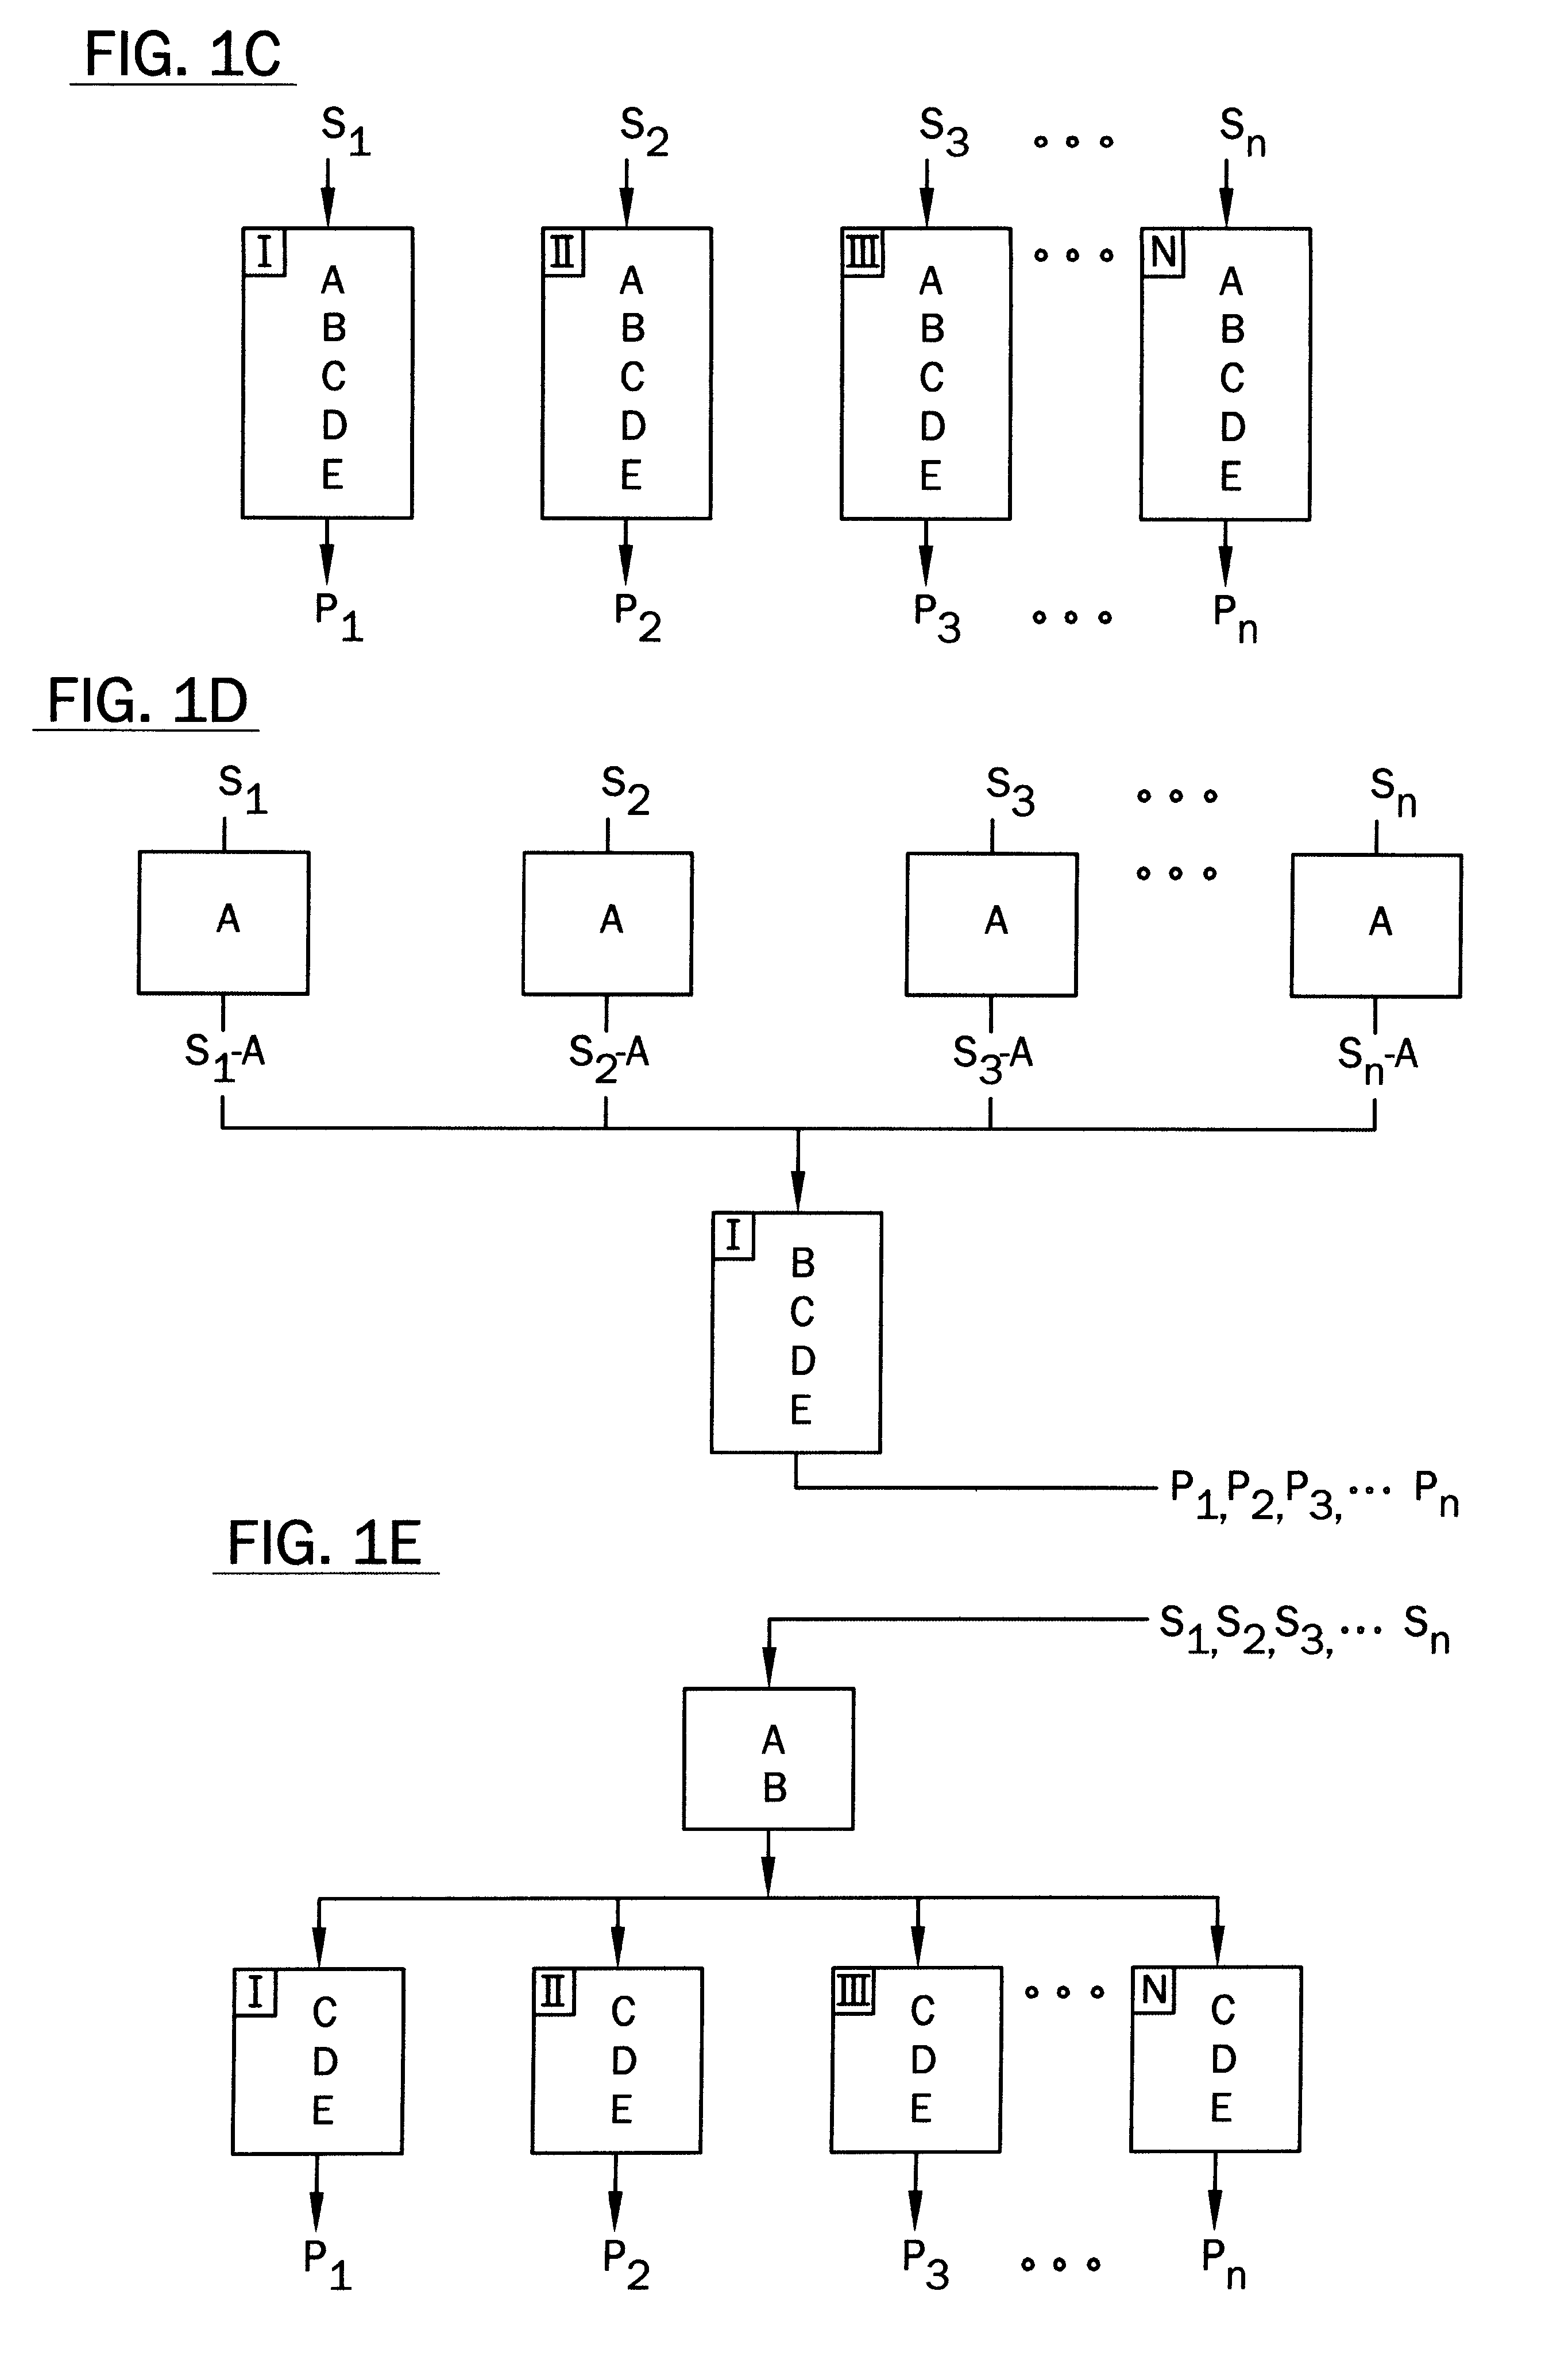 Fiber optic apparatus and use thereof in combinatorial material science